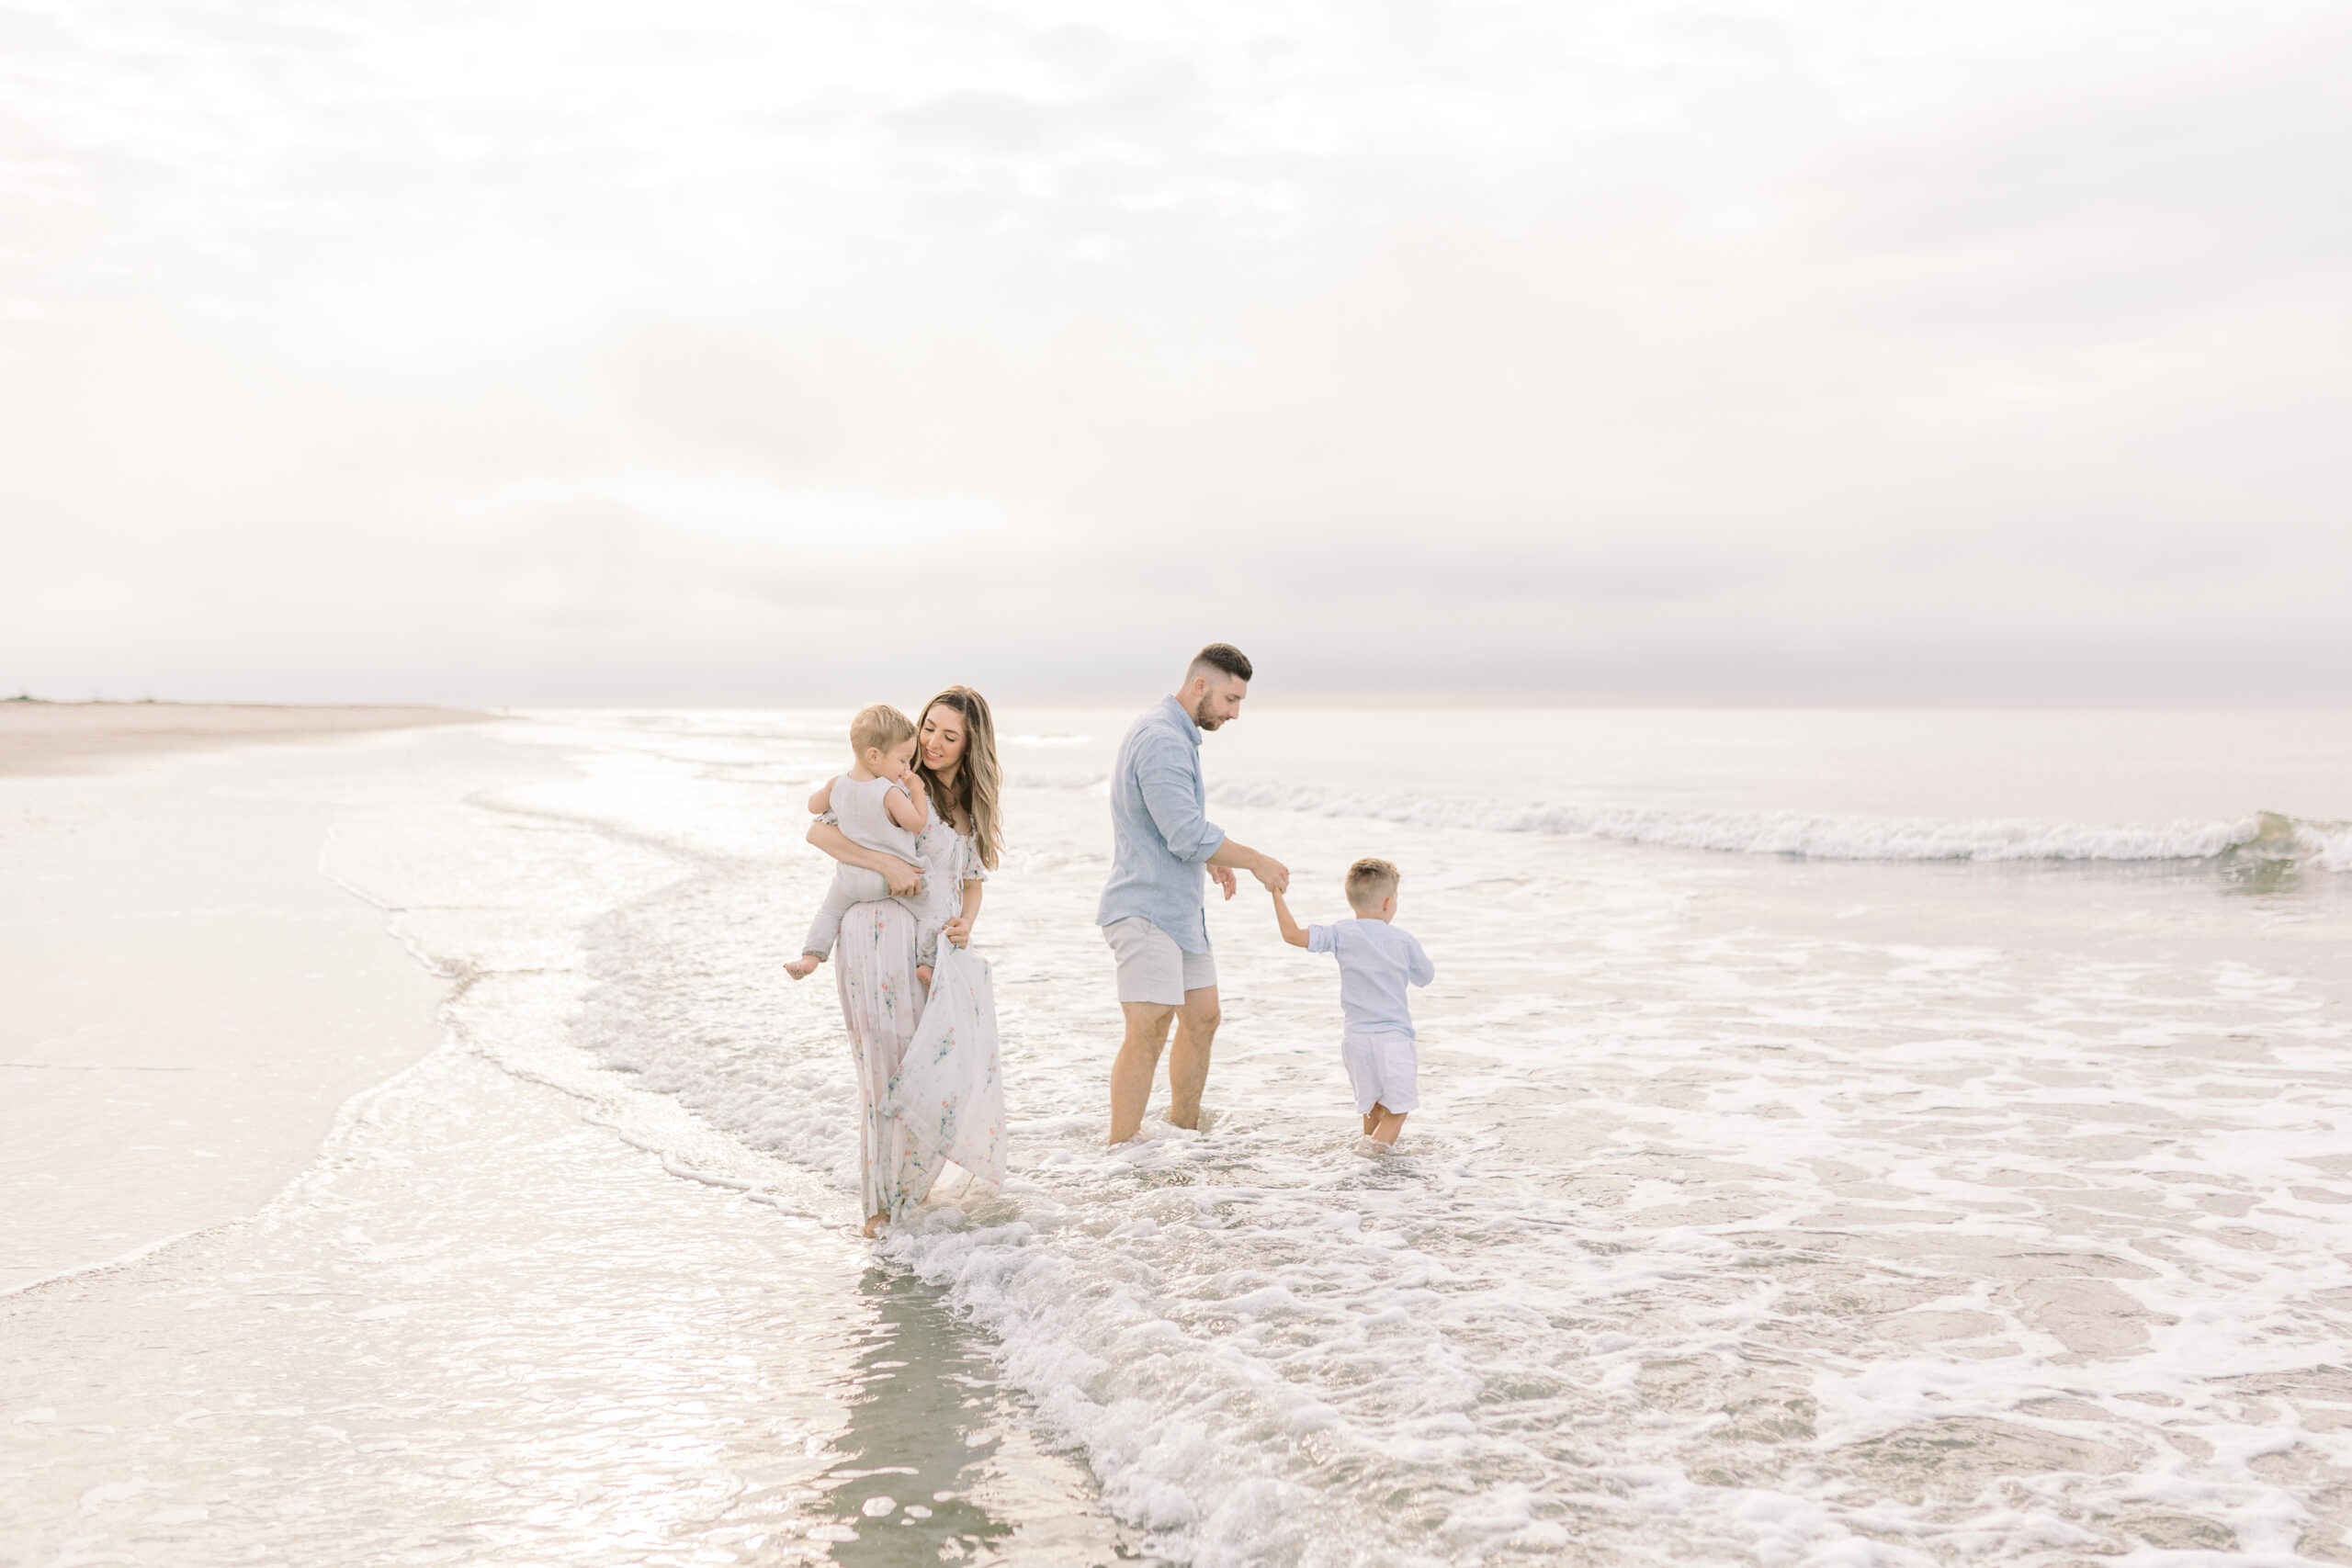 Portrait of the Federico family against a beautiful sunrise over the ocean on Isle of Palms beach